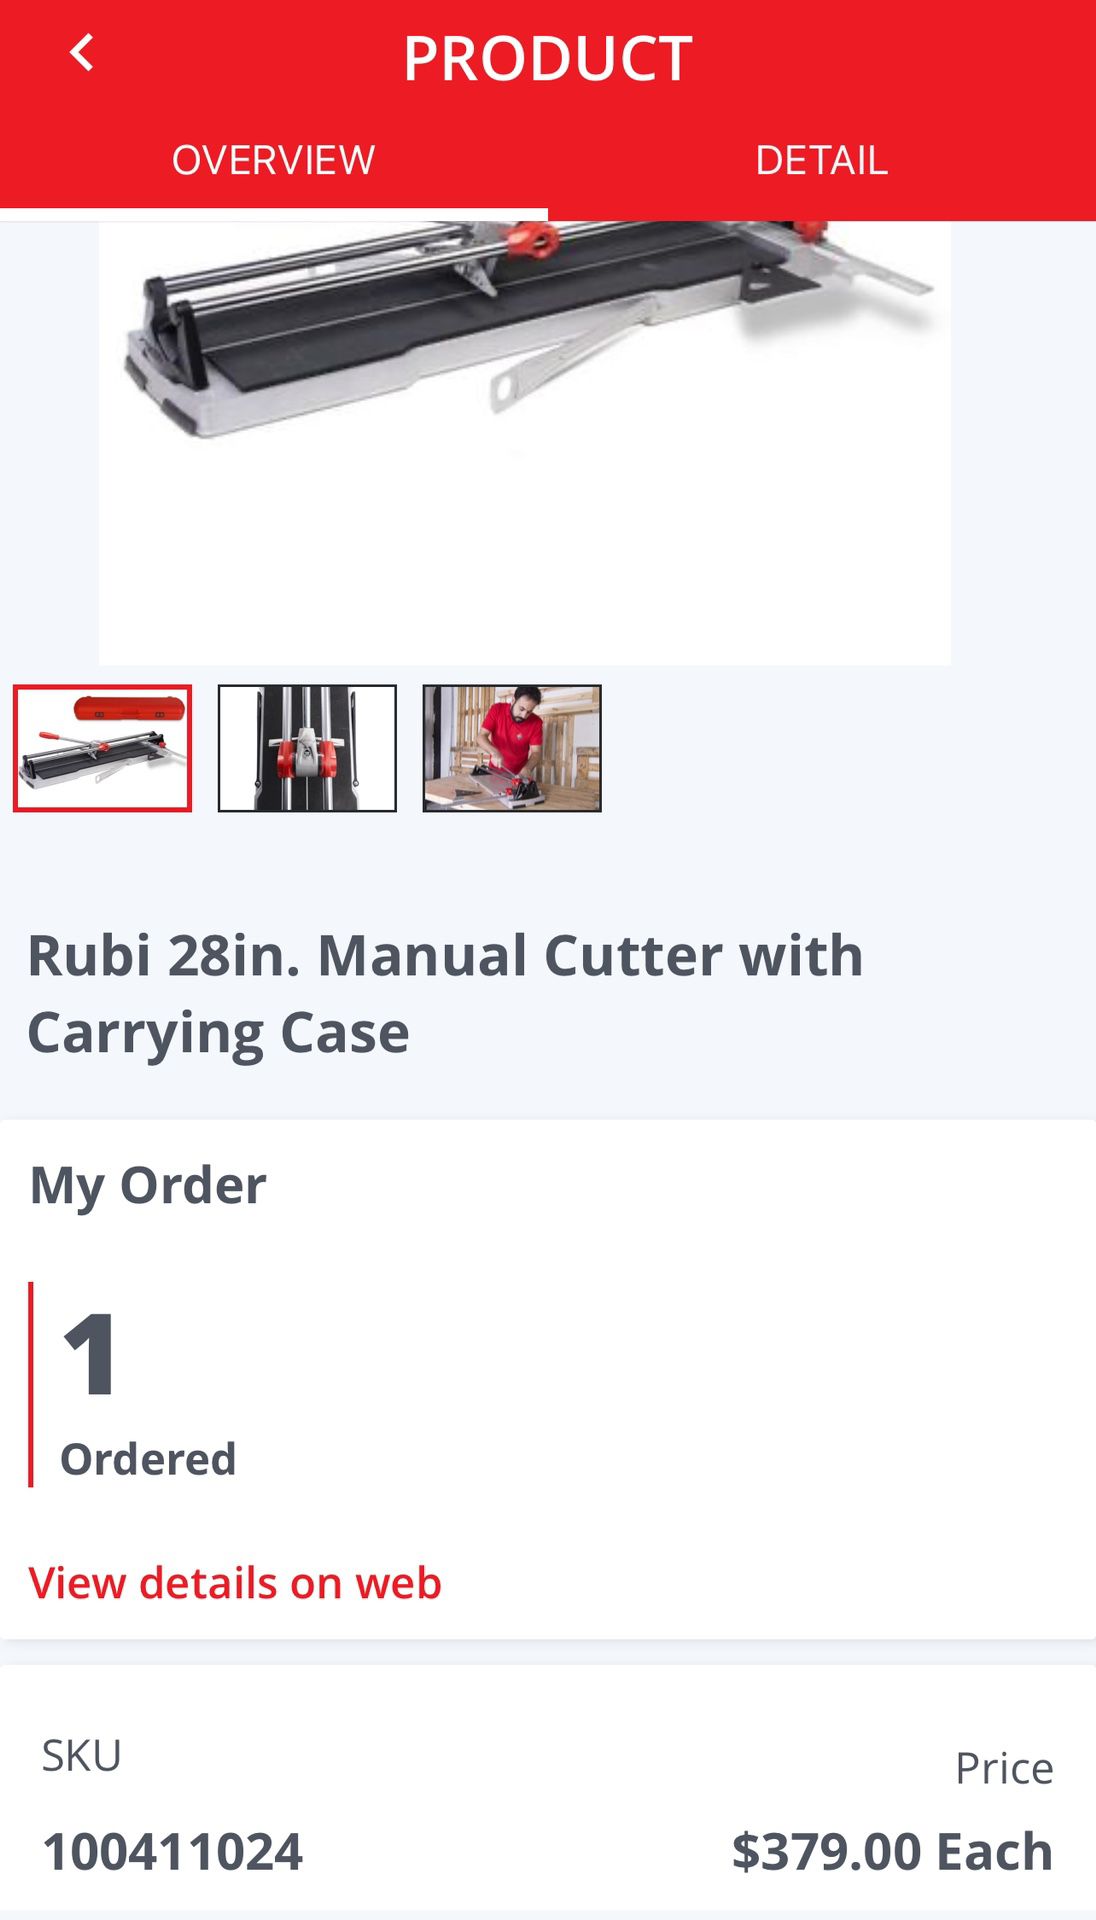 RUBI 28IN. MANUAL CUTTER WITH CARRYING CASE